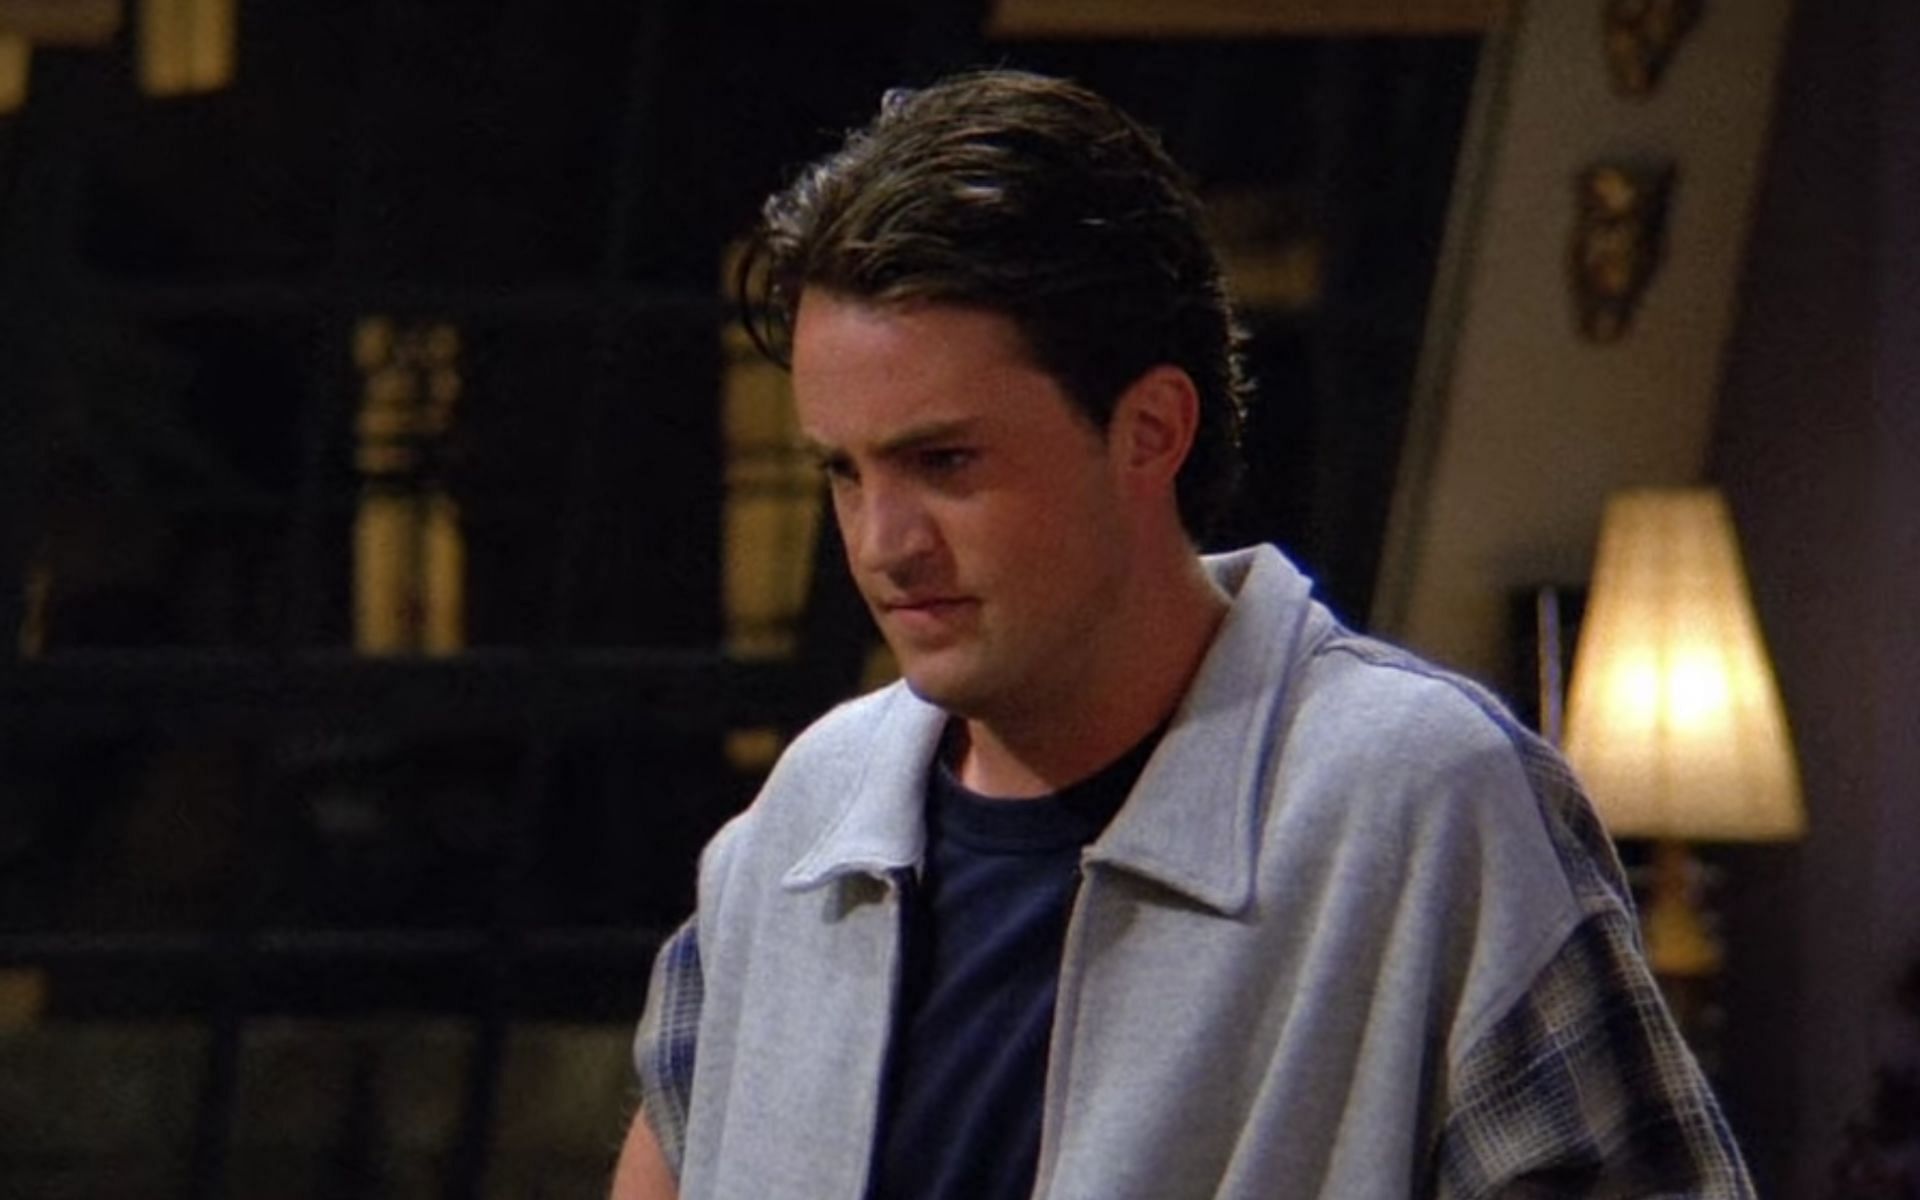 The times when Chandler Bing ruined Thanksgiving in Friends (Image via Netflix)